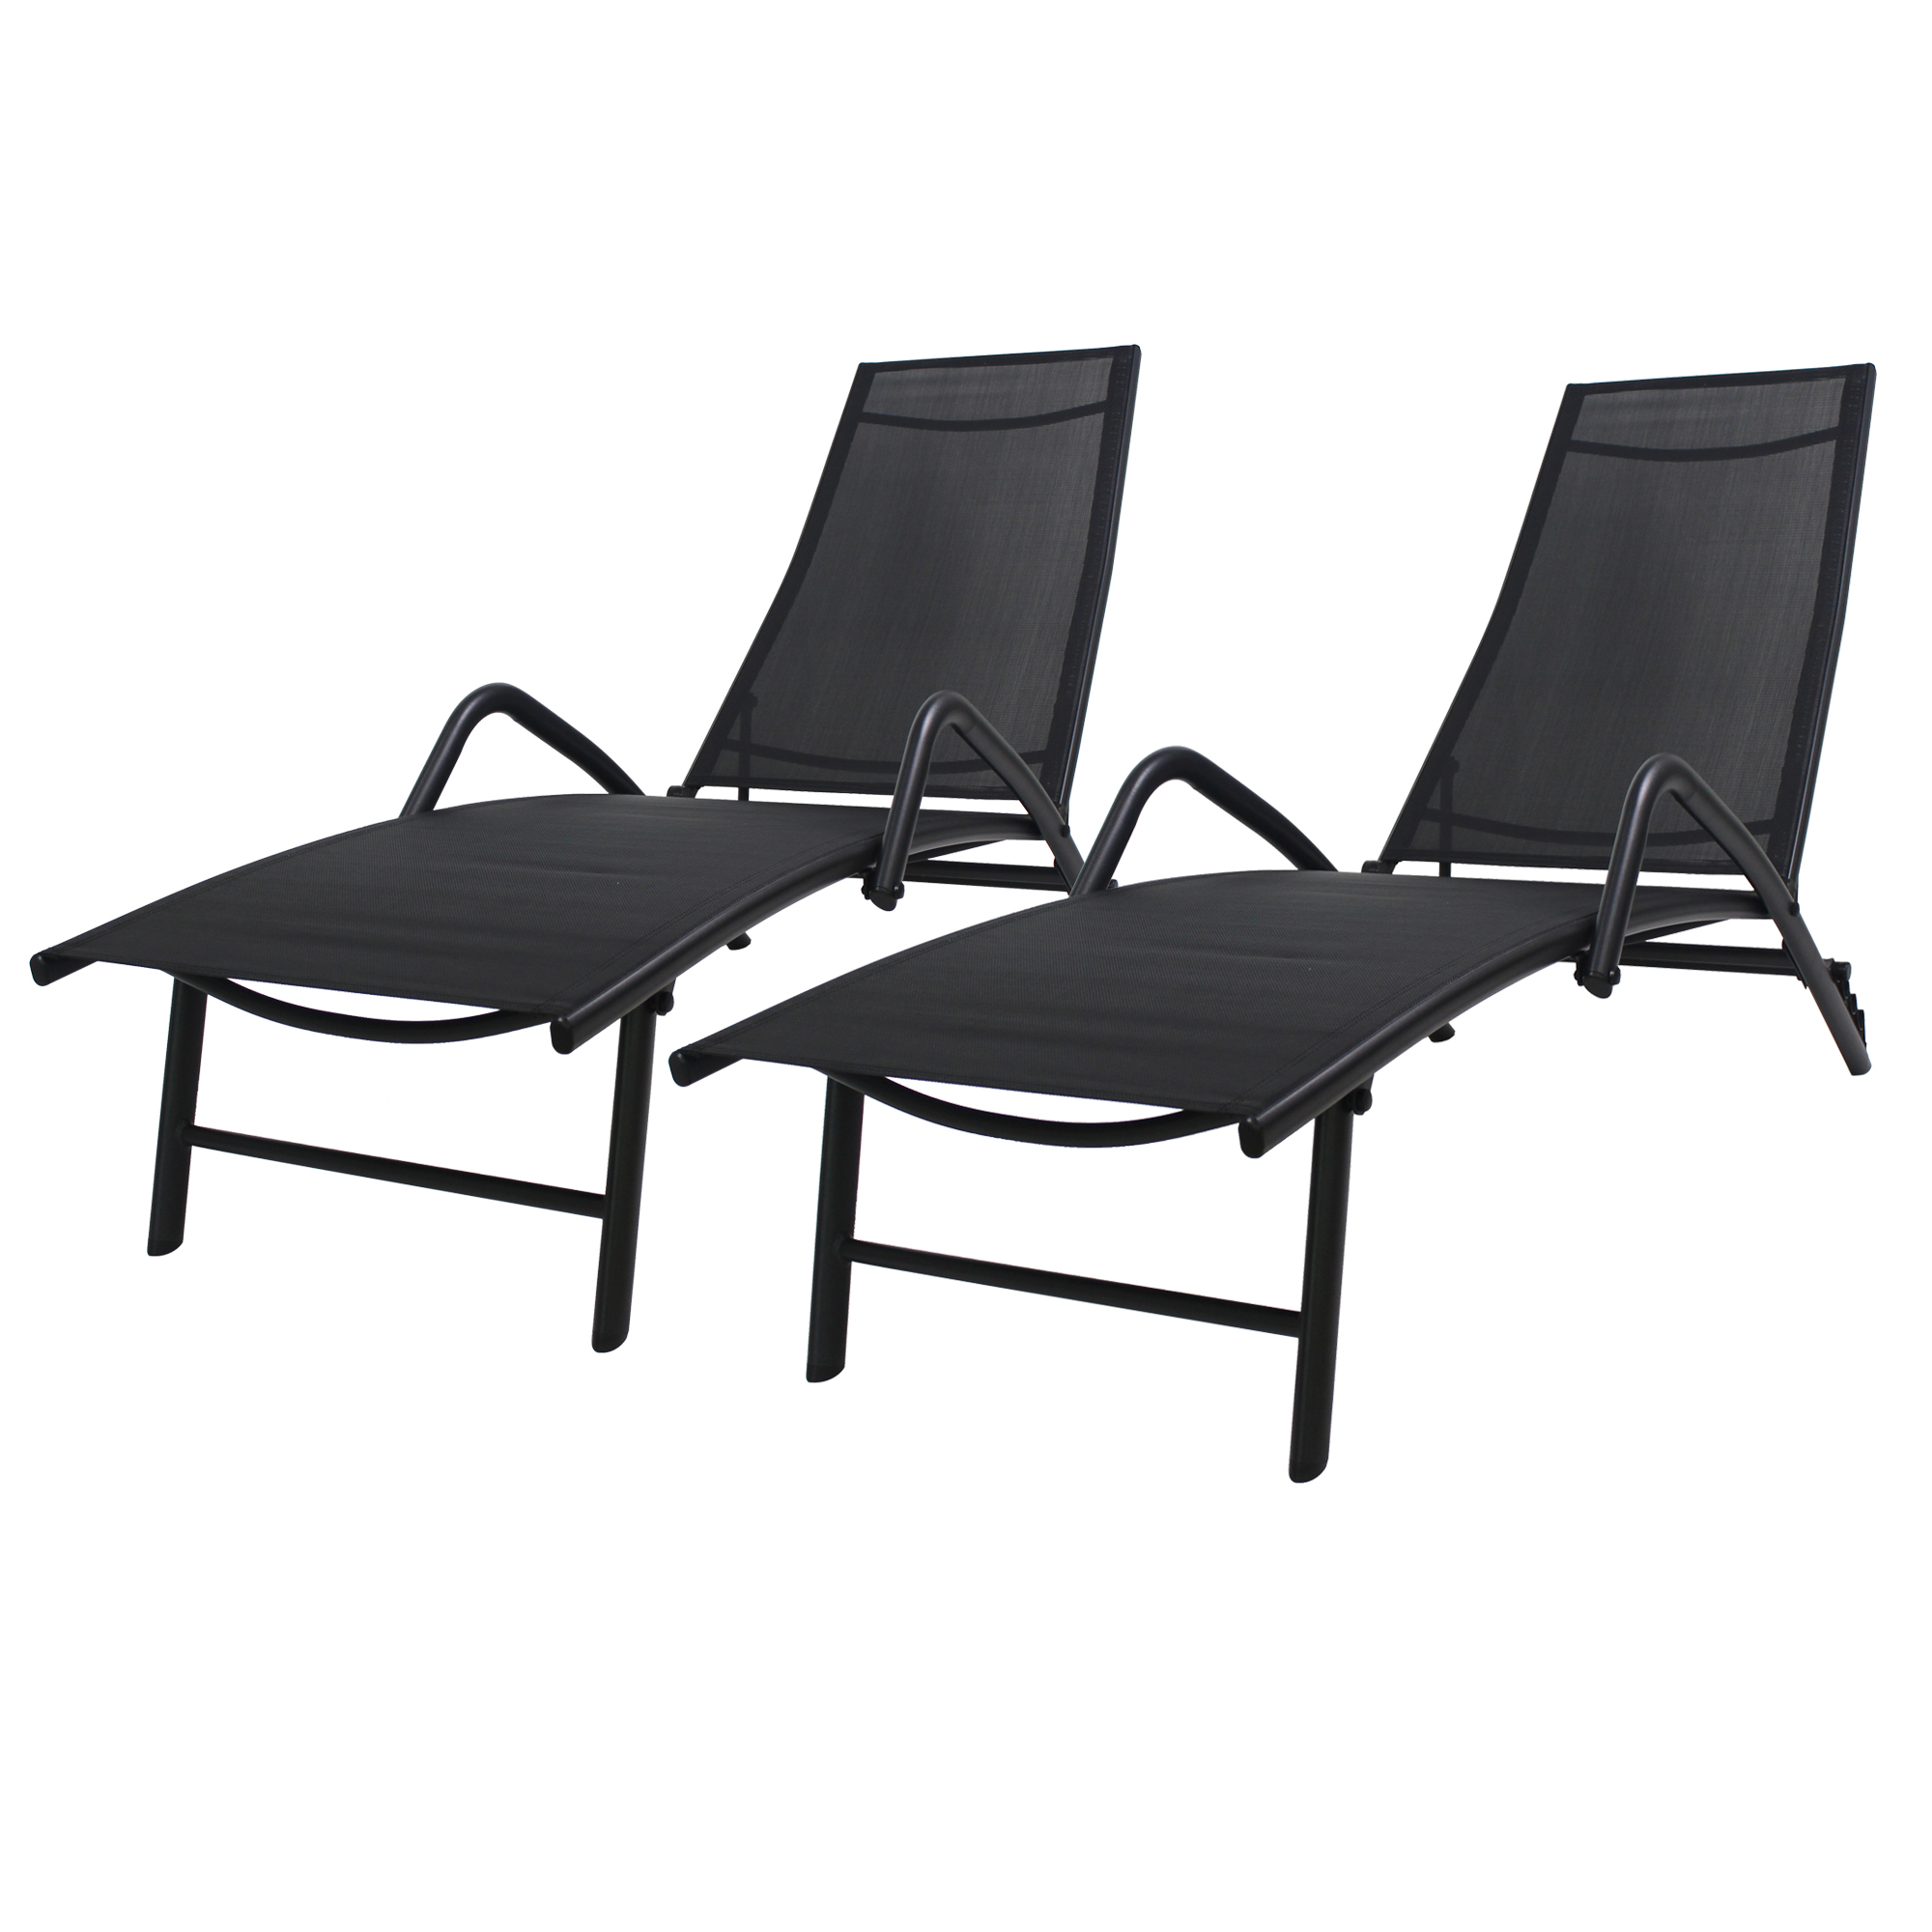 Set of 2 Chaise Lounge for Beach, Patio Furniture Outdoor Chaise Lounge Chair with Adjustable Back, Metal Reclining Lounge Chair for Backyard, Porch, Pool, L4555 - image 2 of 8